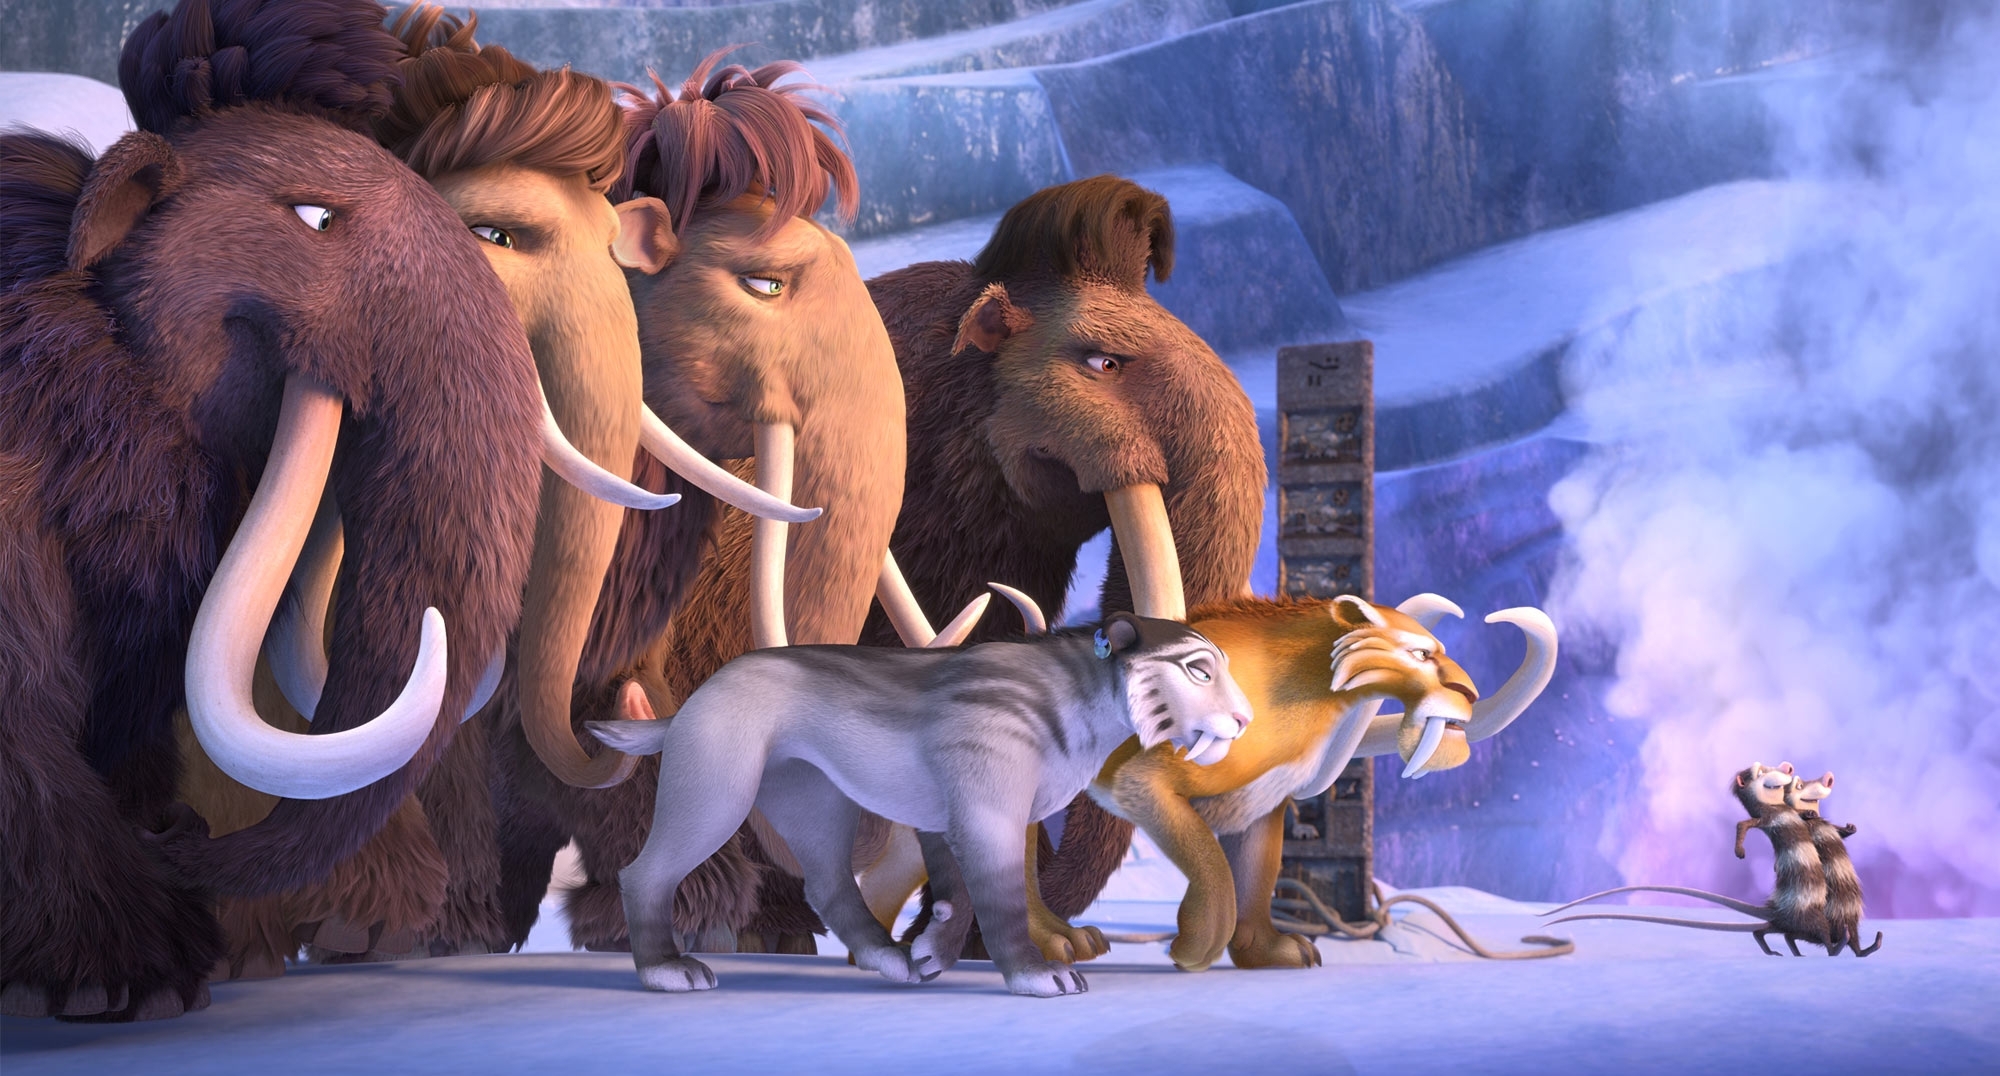 Crash (Ice Age) wallpapers for desktop, download free Crash (Ice Age